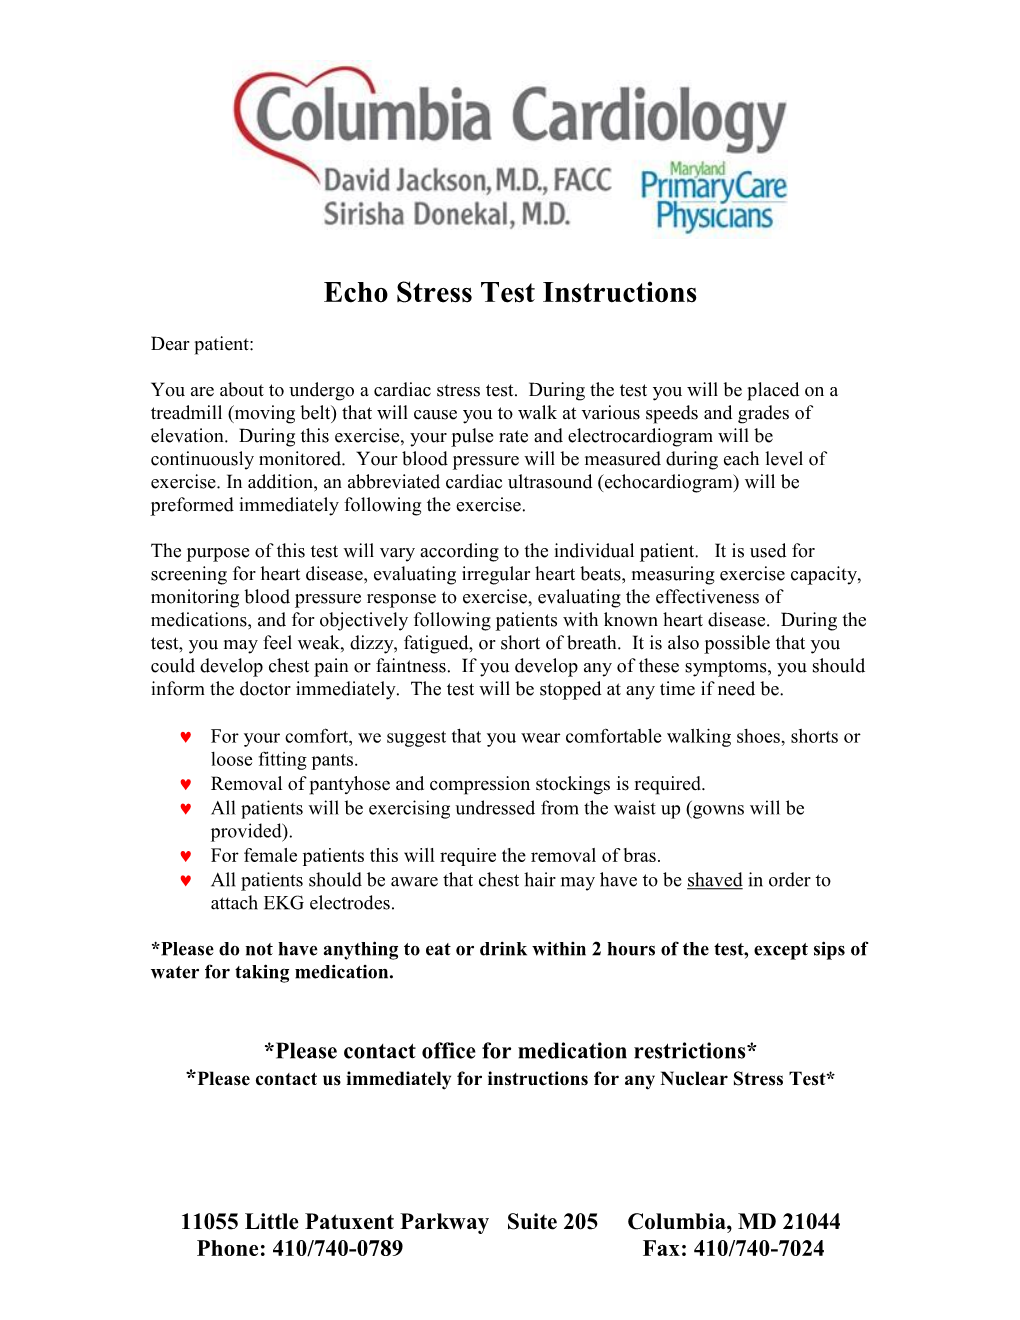 Echo Stress Test Instructions and Patient Authorization Form